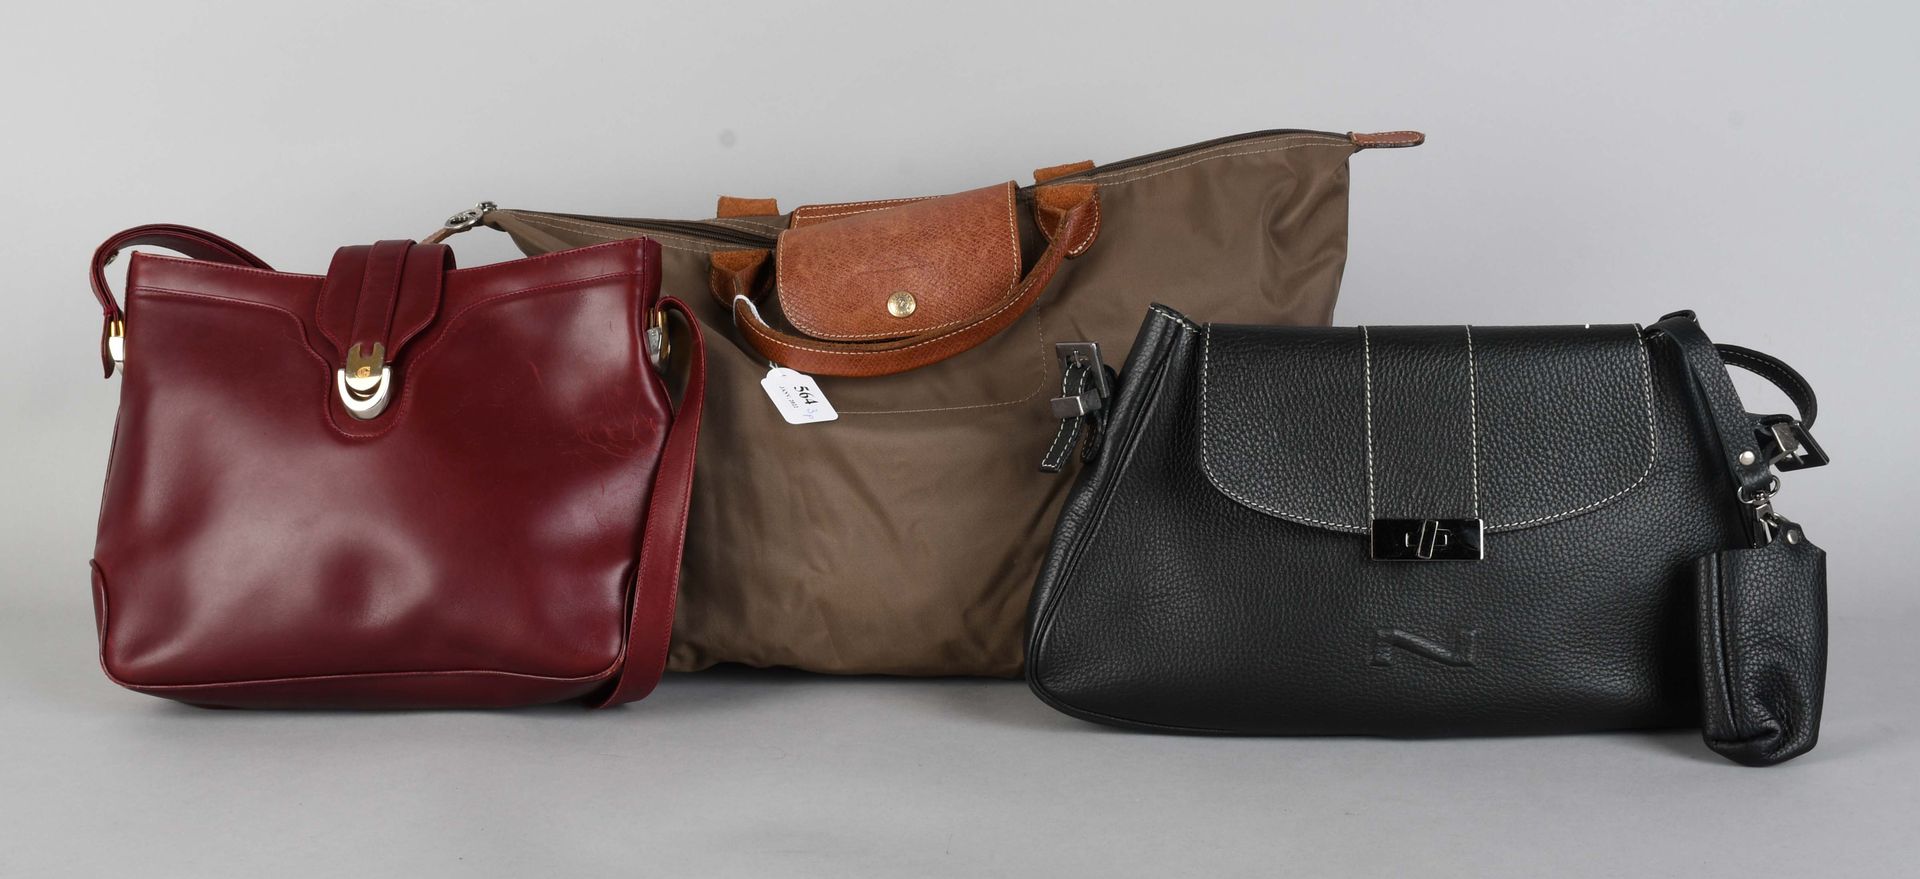 Null Set of three bags including a foldable one from Longchamp